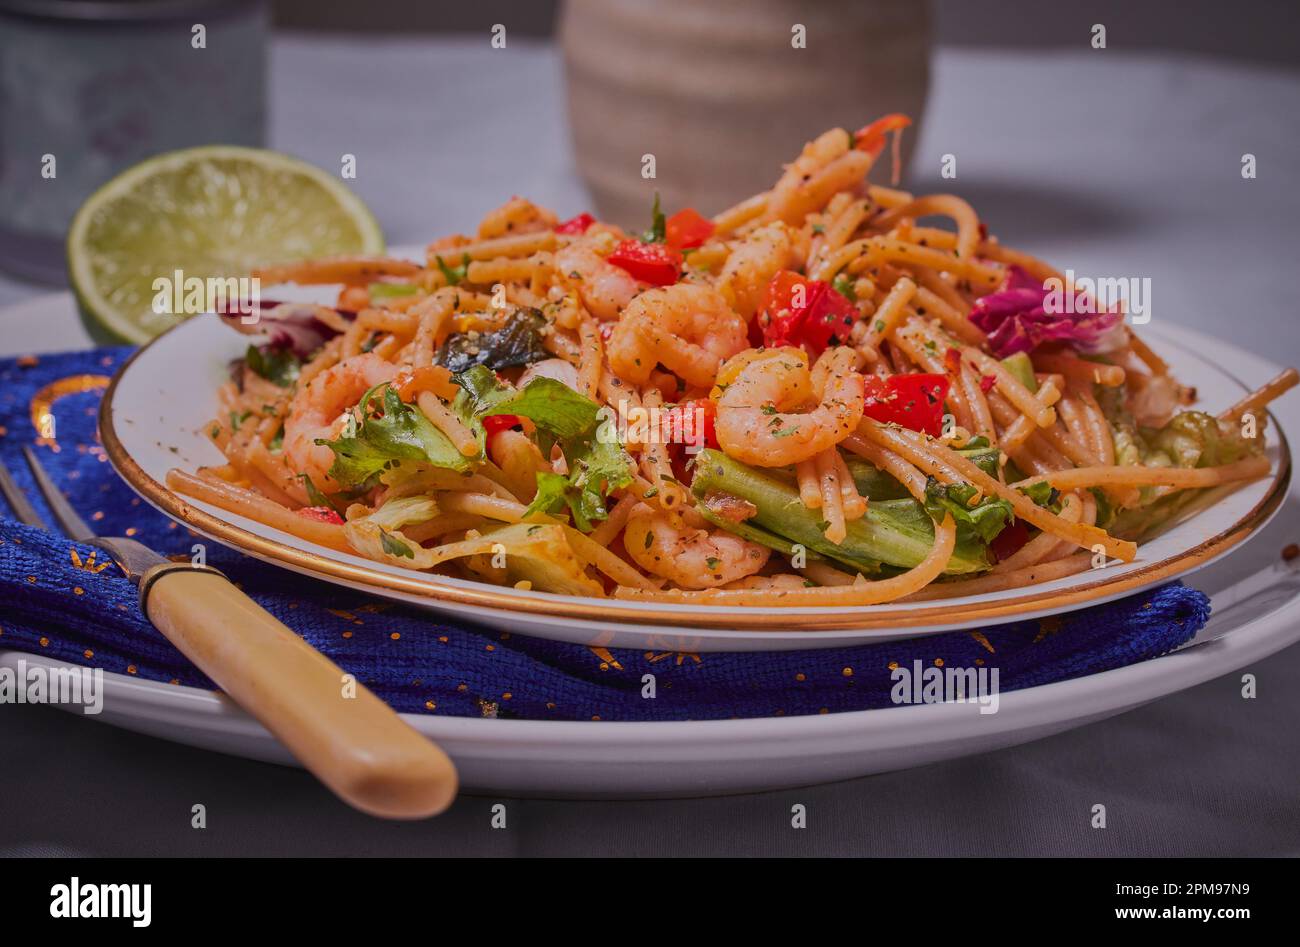 Prawn pasta dish with vegetables ,herbs and spices. Stock Photo